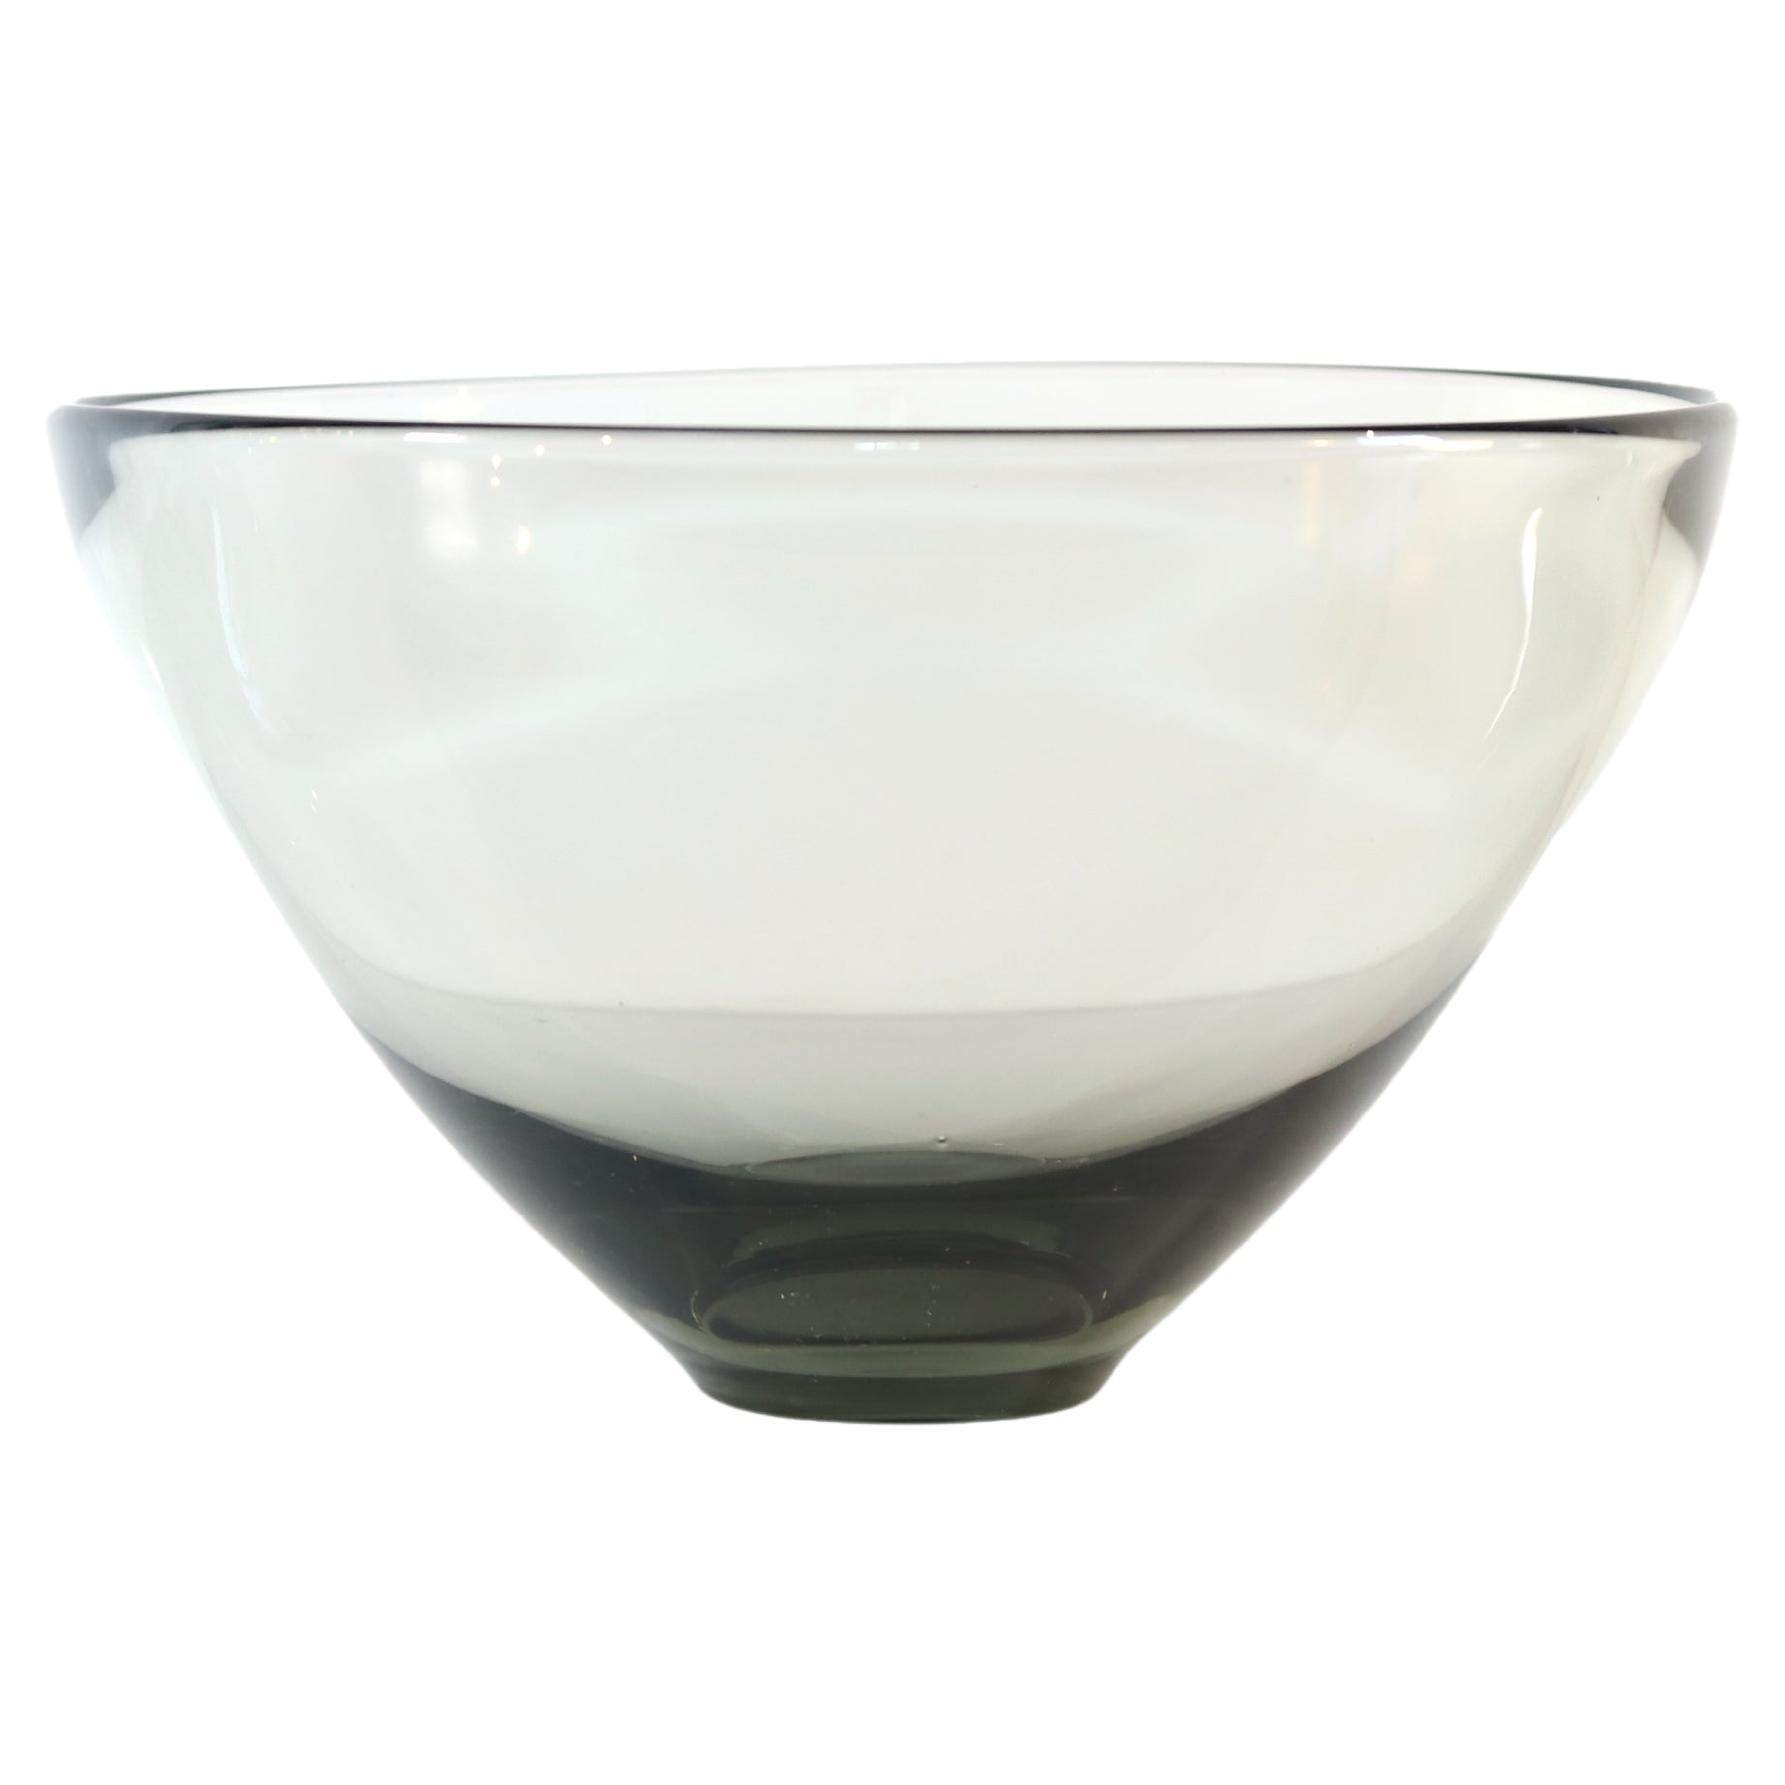 Smoked Glass Bowl by Per Lütken for Holmegaard Model 18504, 1960's